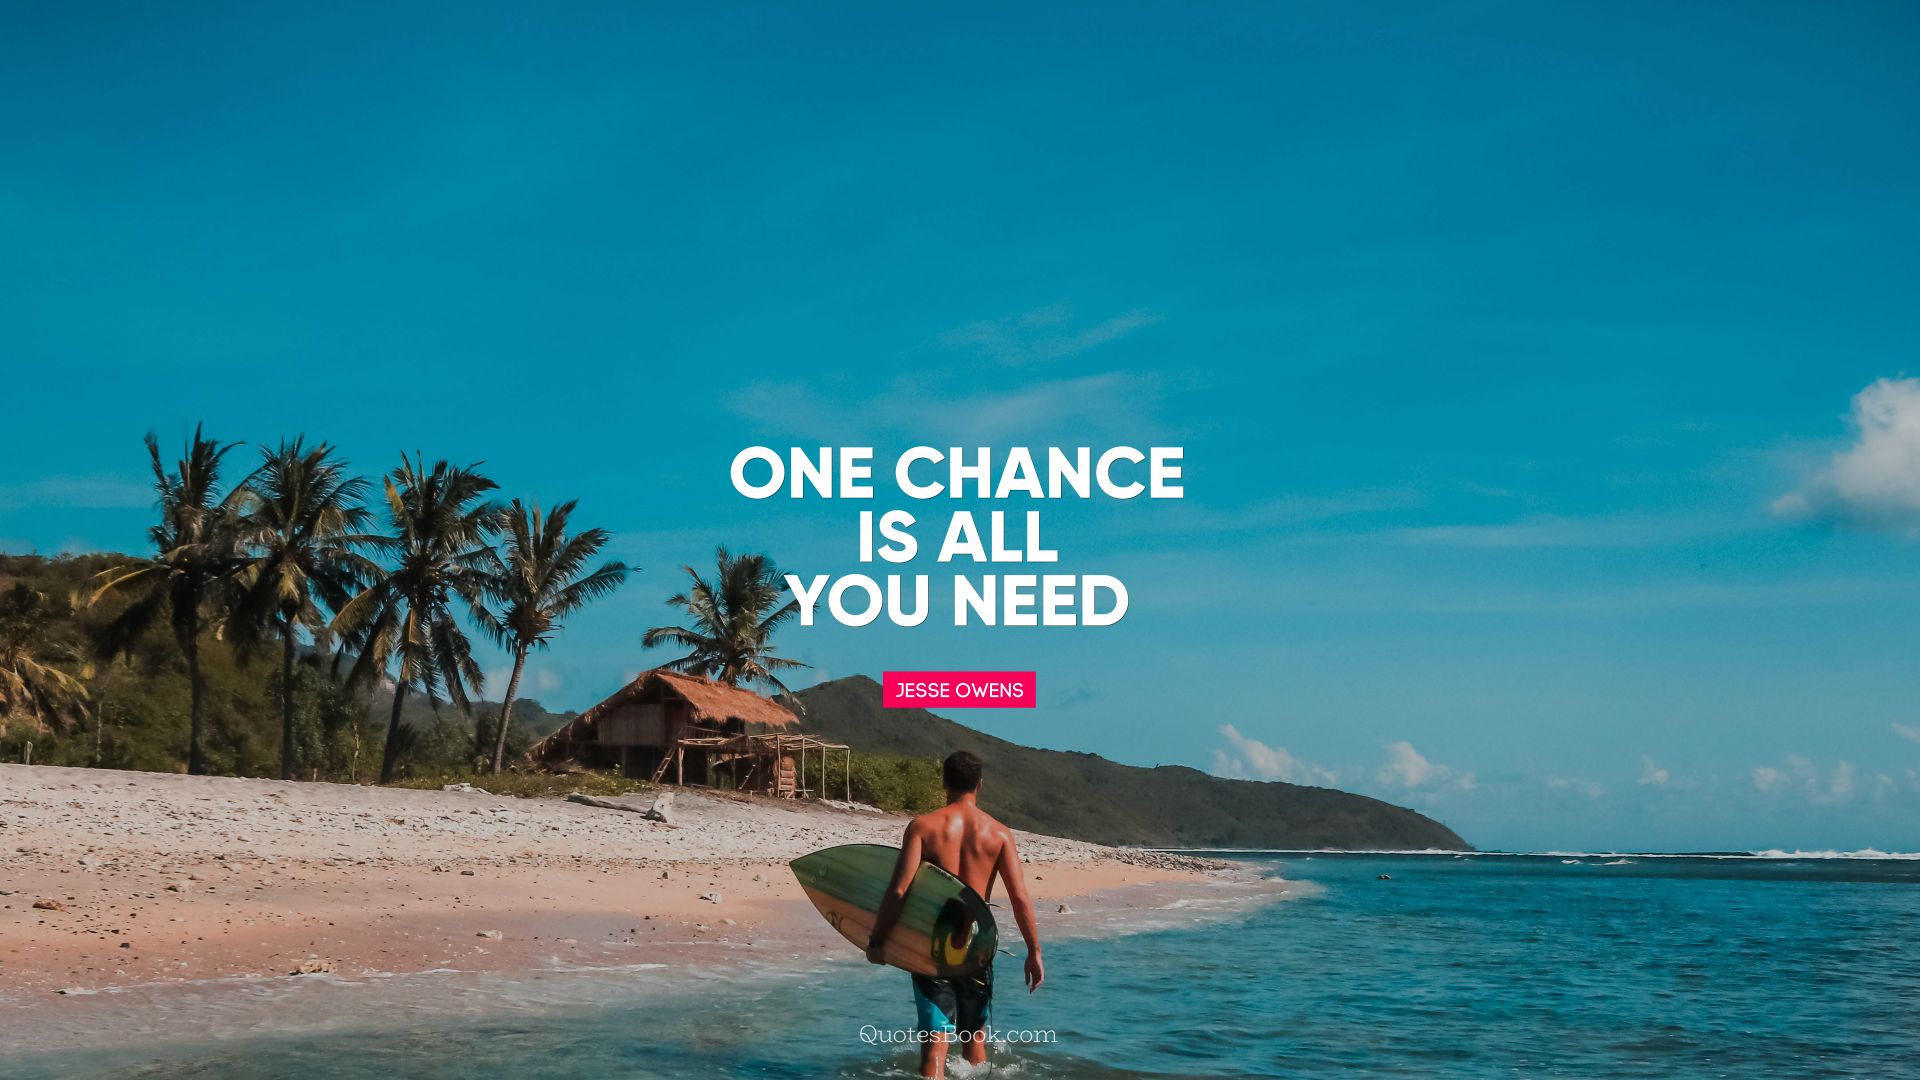 One chance is all you need. - Quote by Jesse Owens